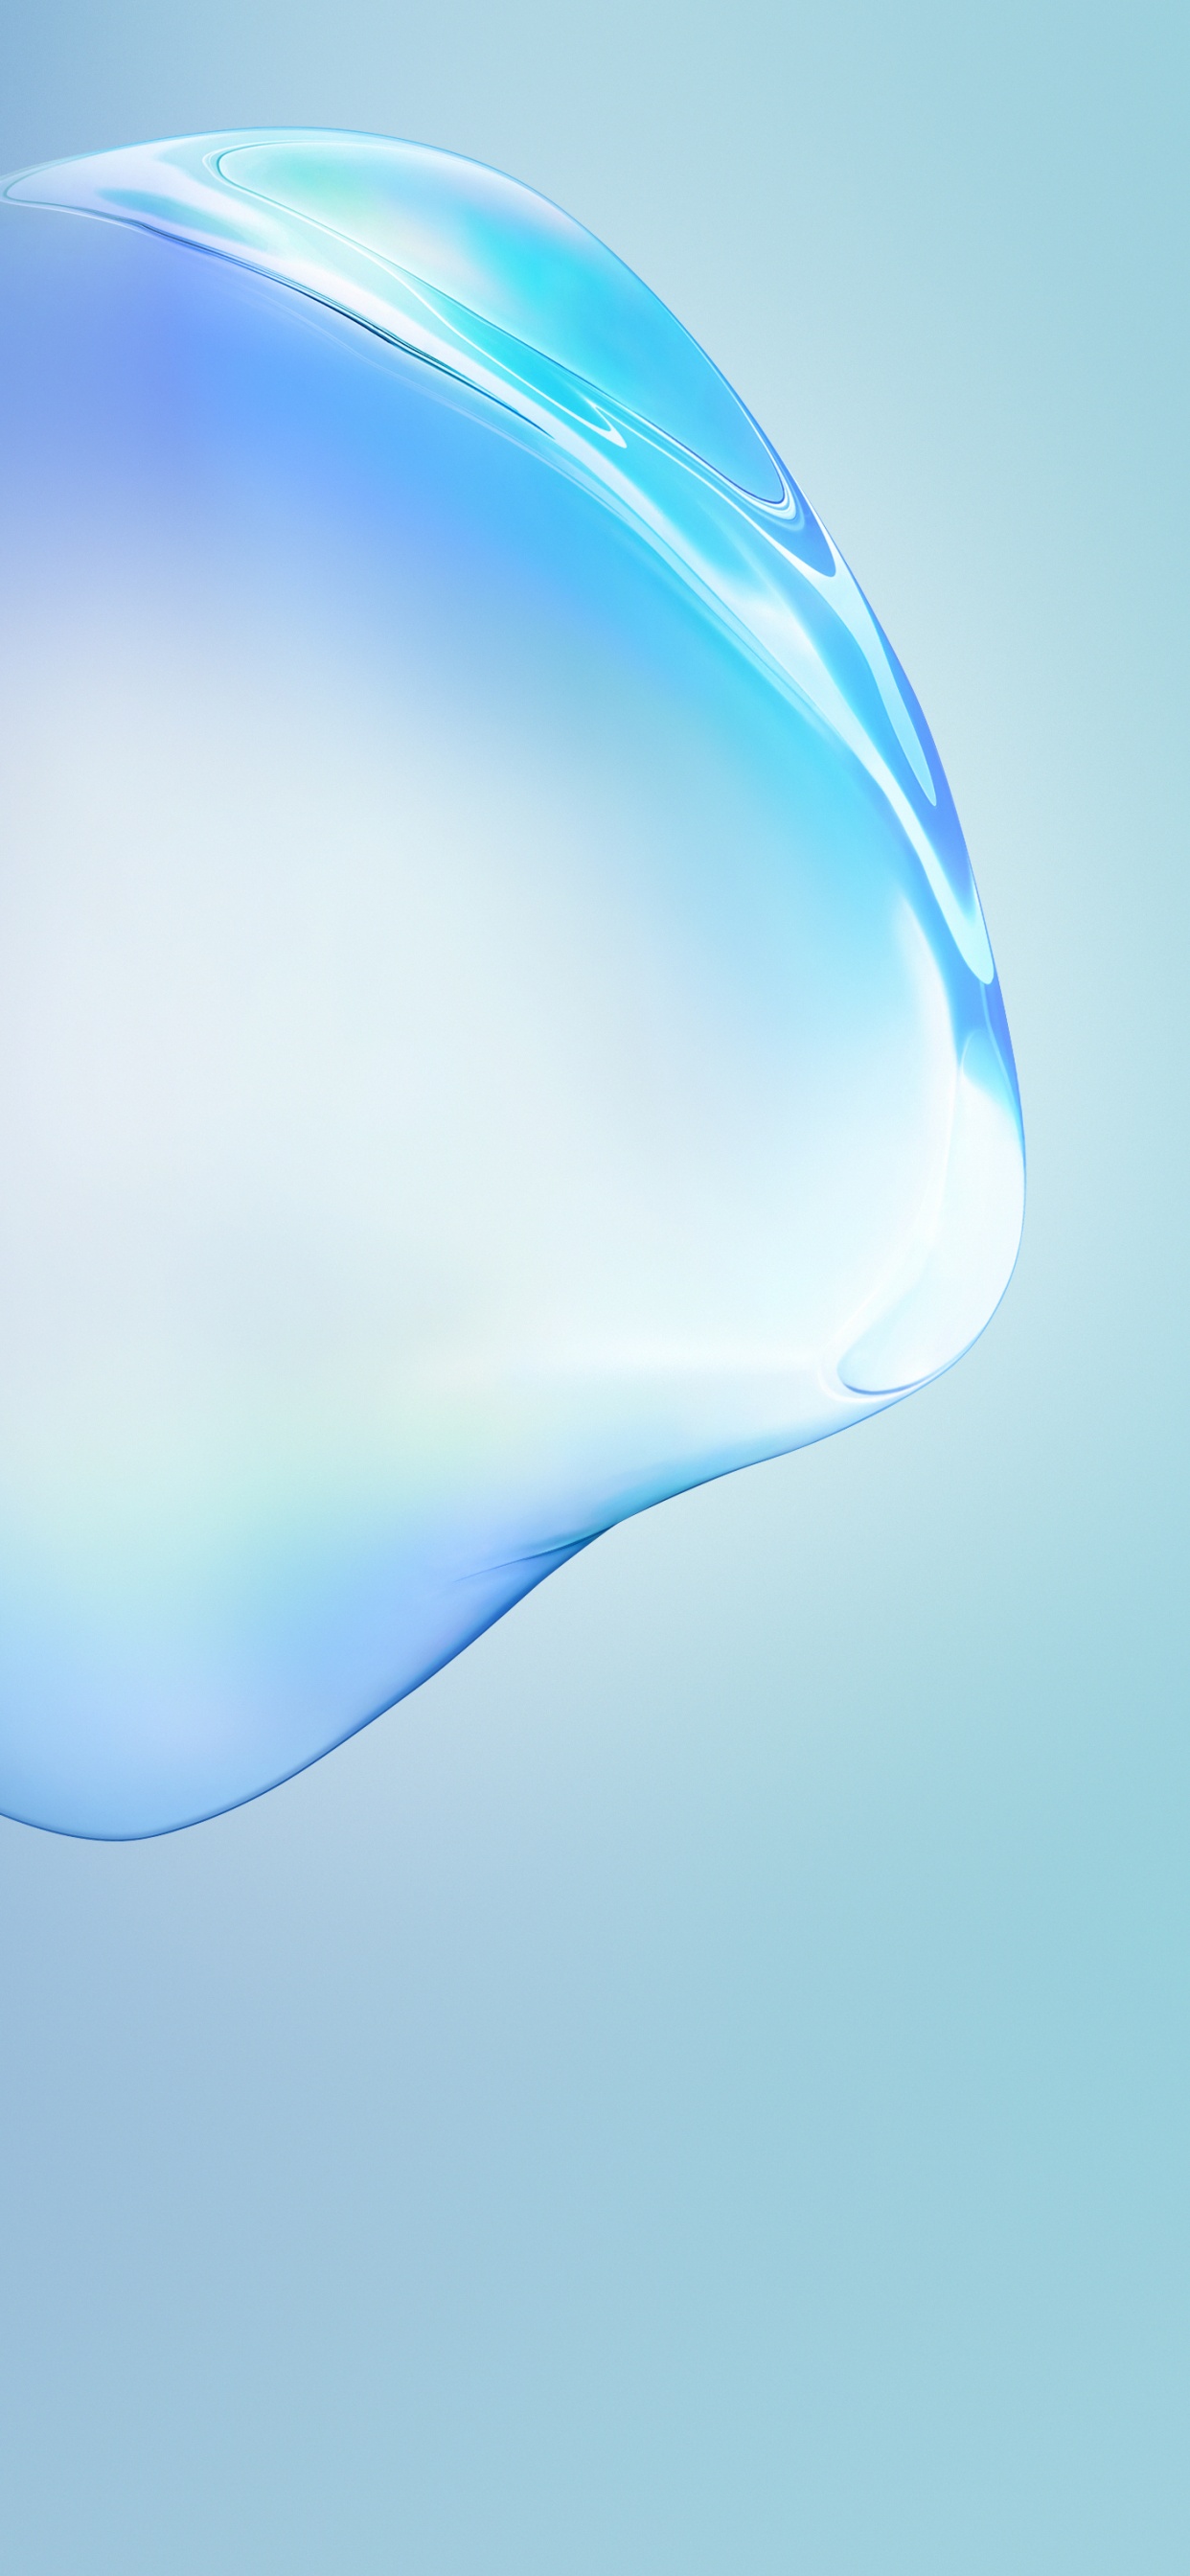 Samsung Galaxy Note10 Wallpaper 4K, Bubble, Blue, Stock, Android Abstract